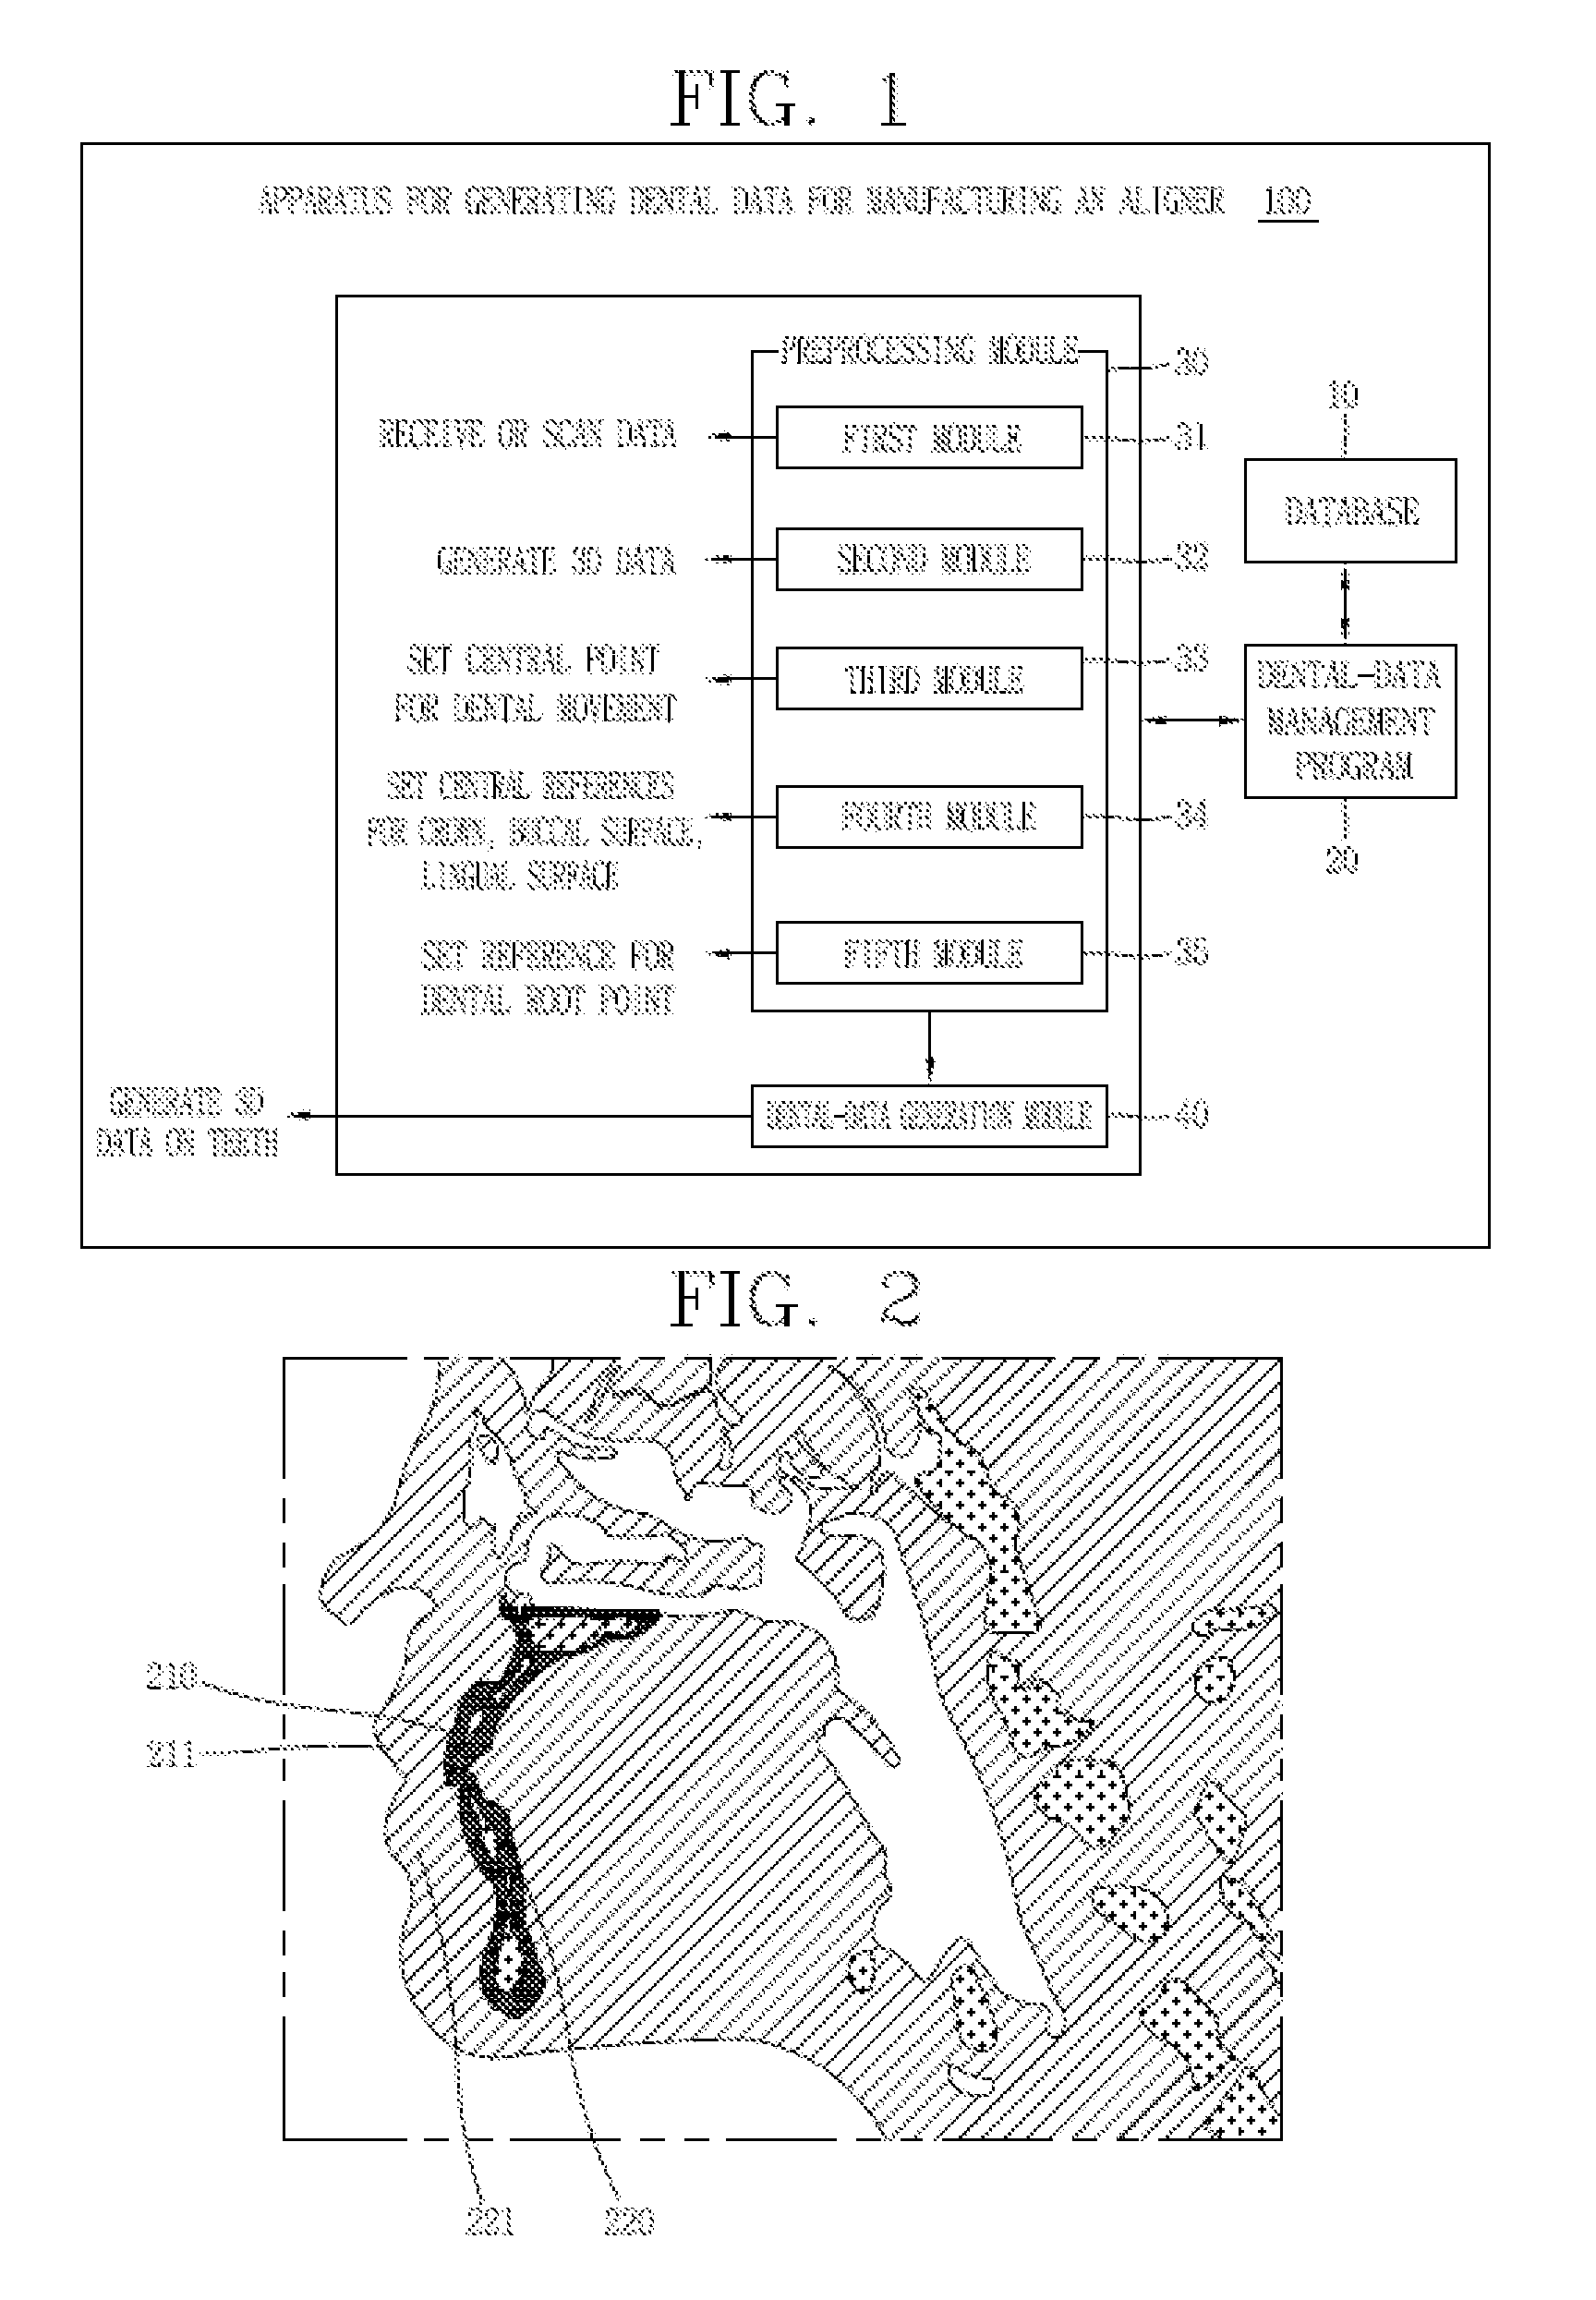 Apparatus for generating dental data for manufacturing an aligner and method of manufacturing clear aligner using the apparatus